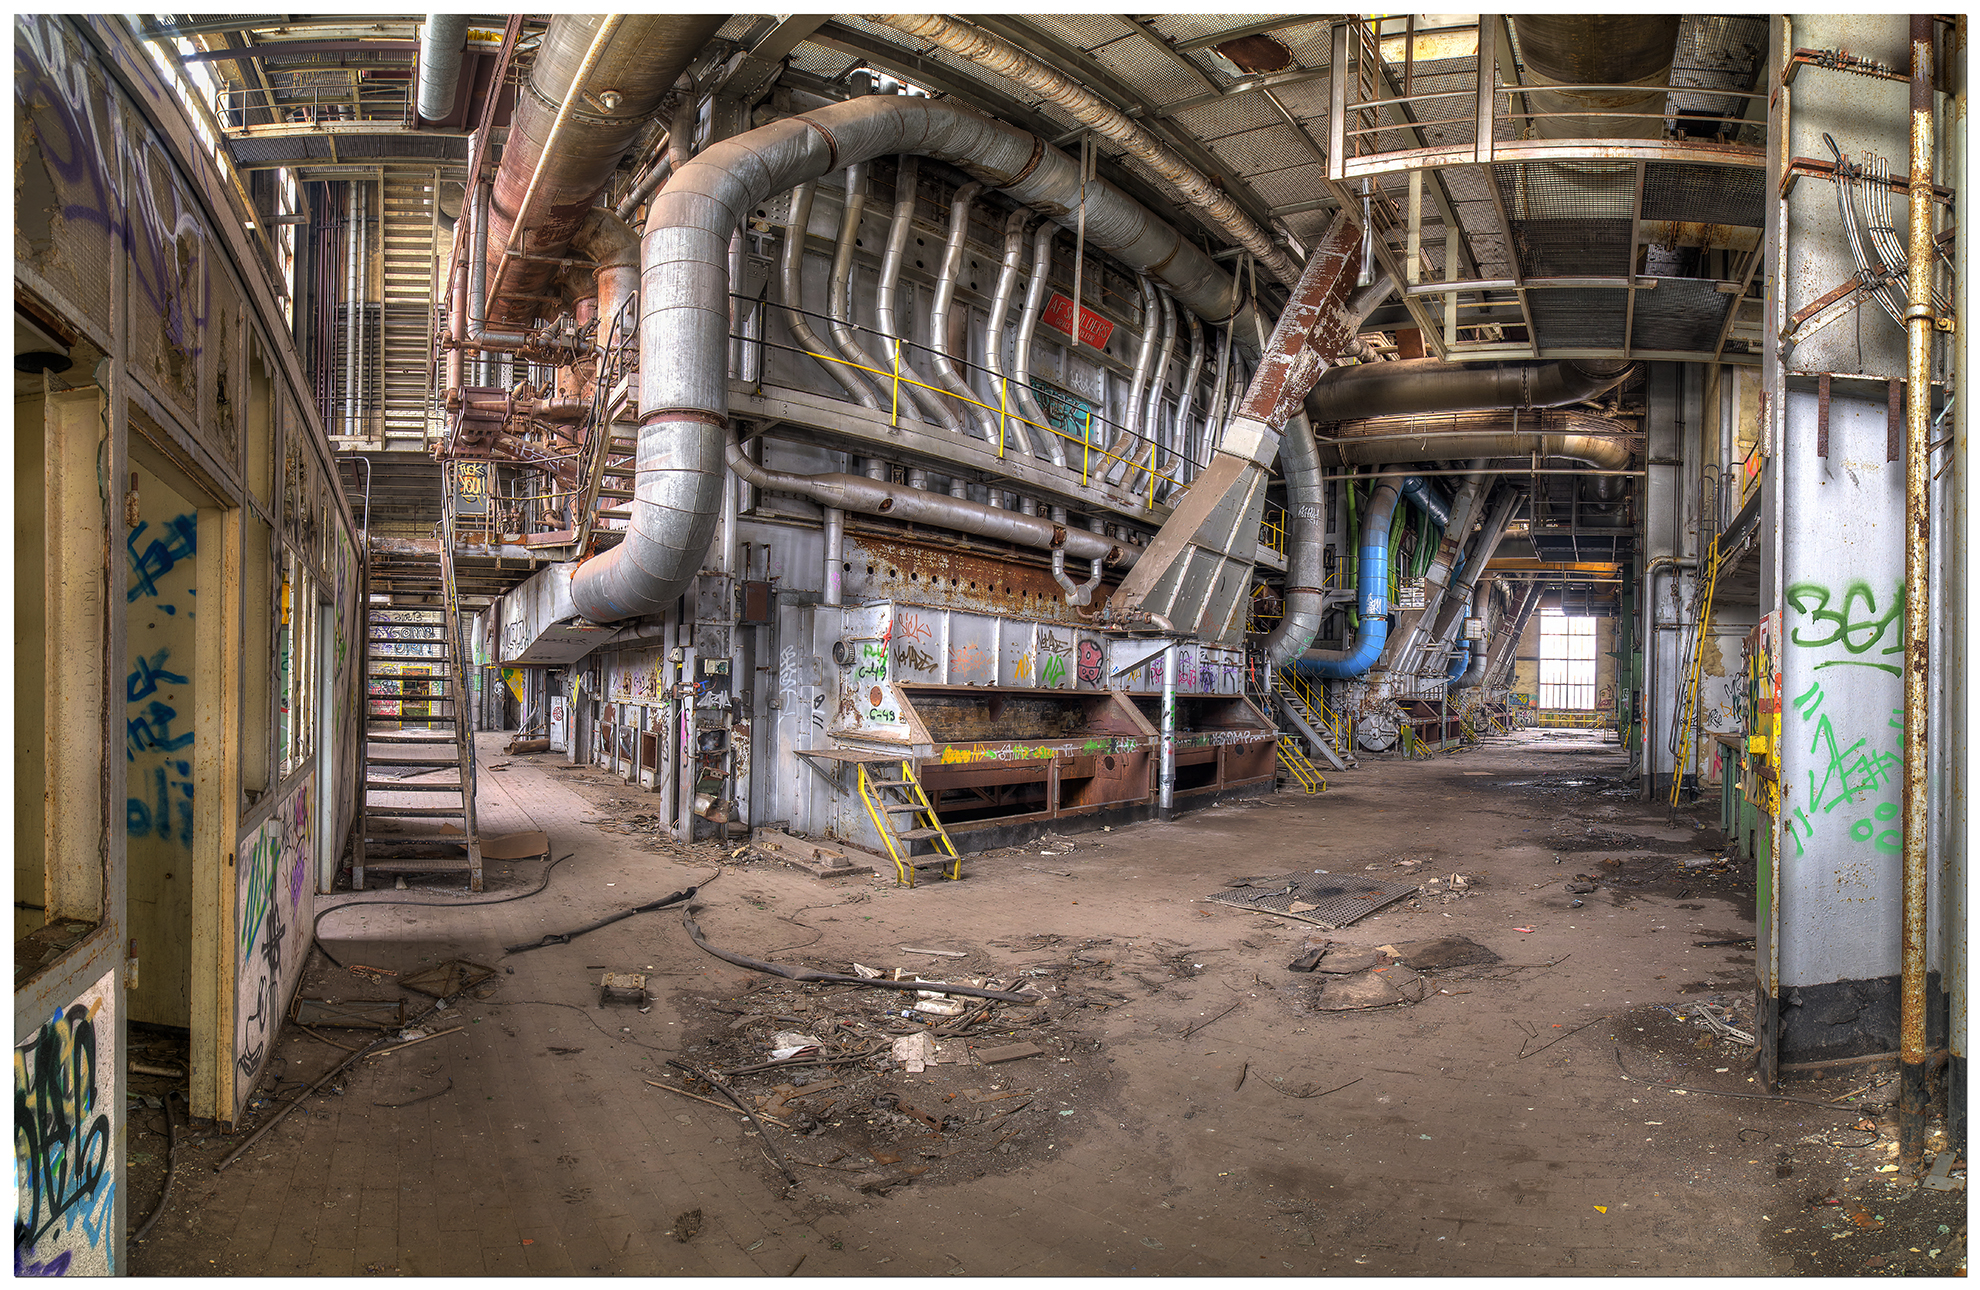 [Group 0]-16012015-16012015-PHI_8938_39_40_41_42hdr-2_16012015-16012015-PHI_8953_4_5_6_7hdr-5 images_0000